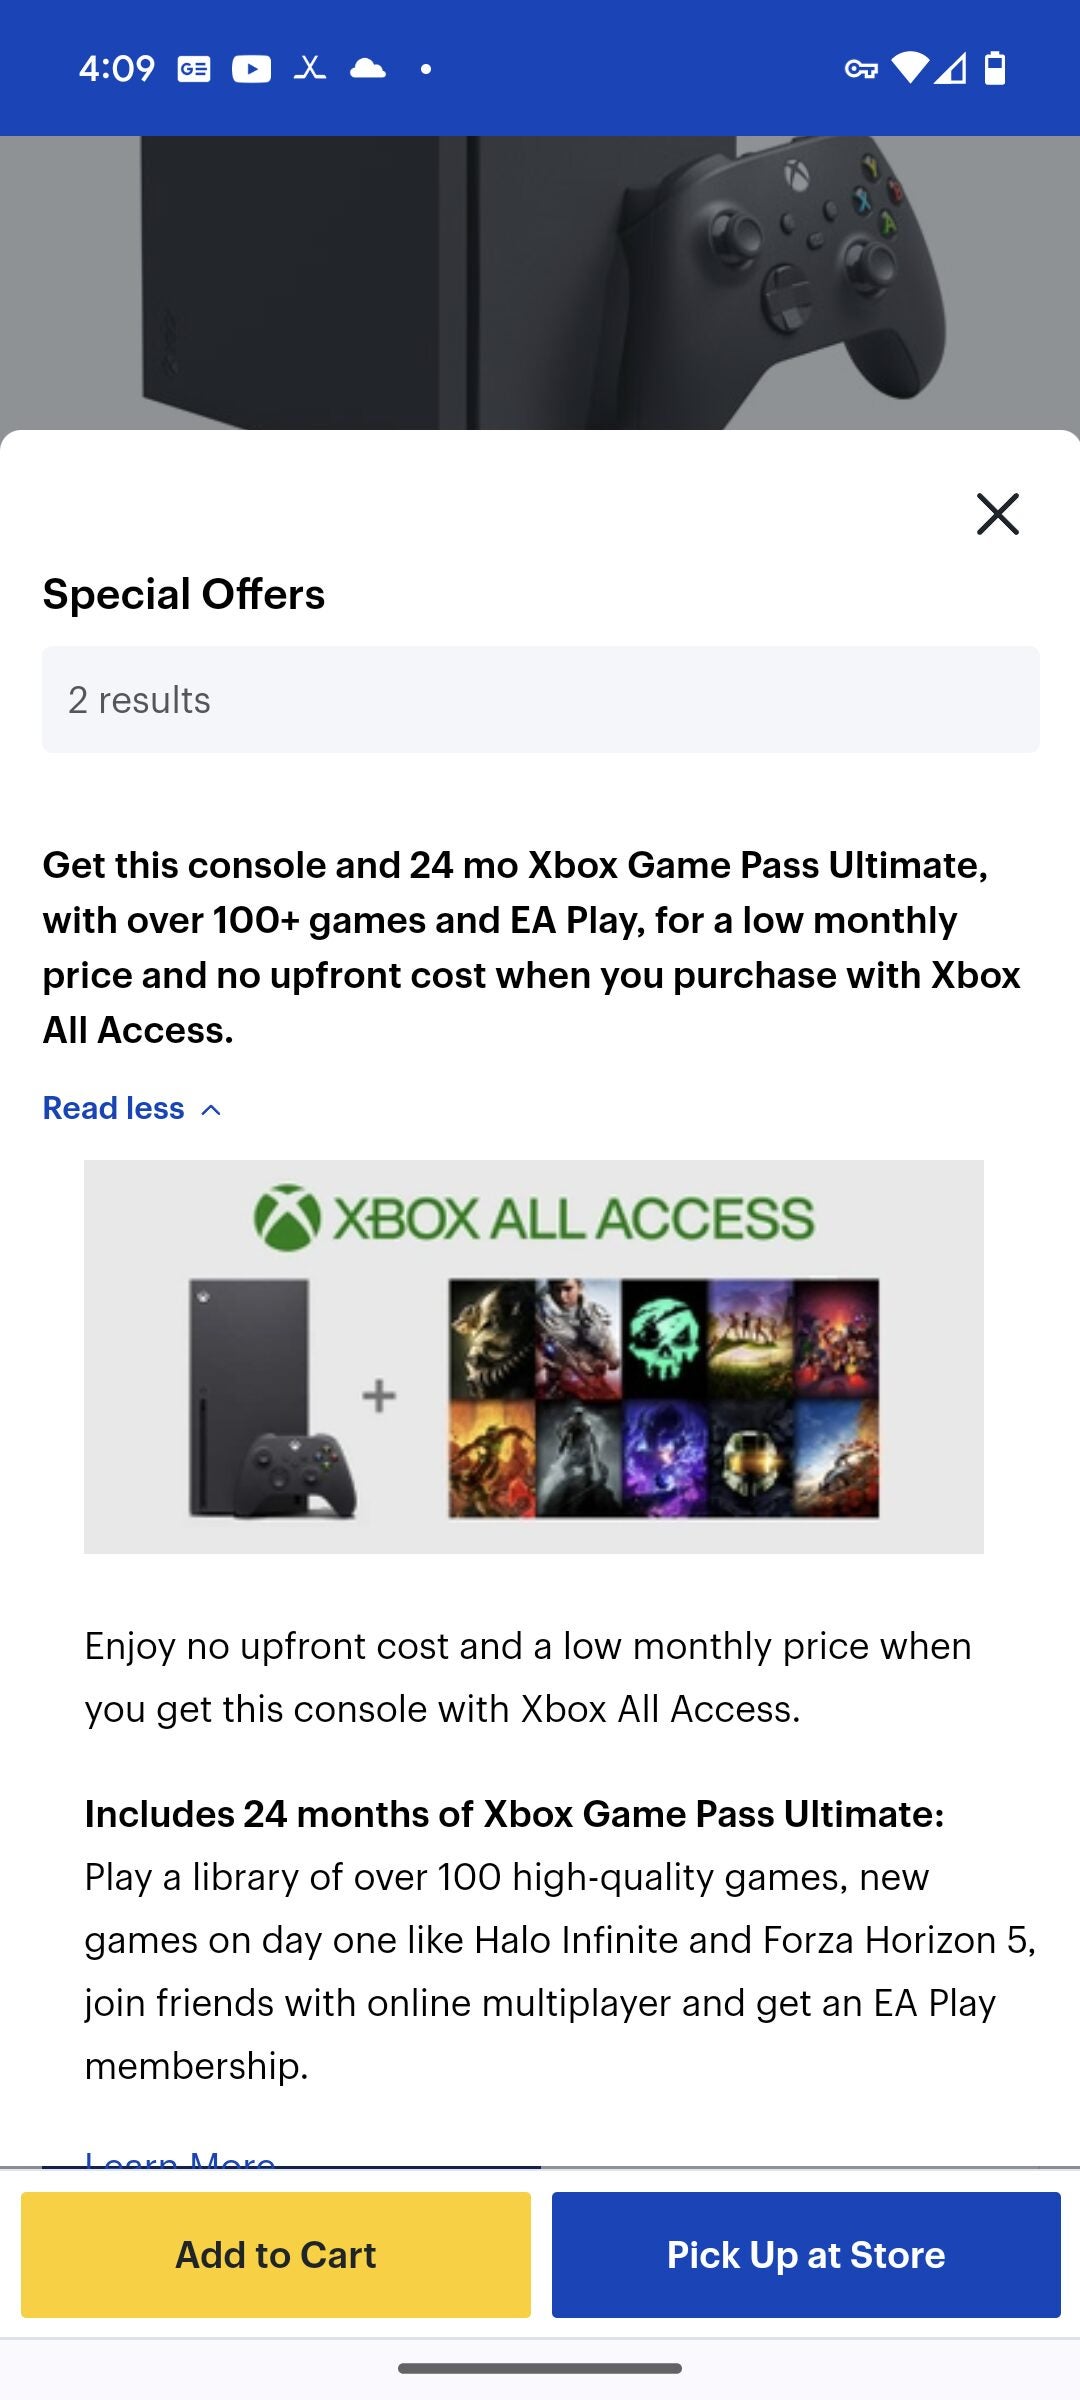 All-New Released Game Pass Ultimate for Game Addicts 